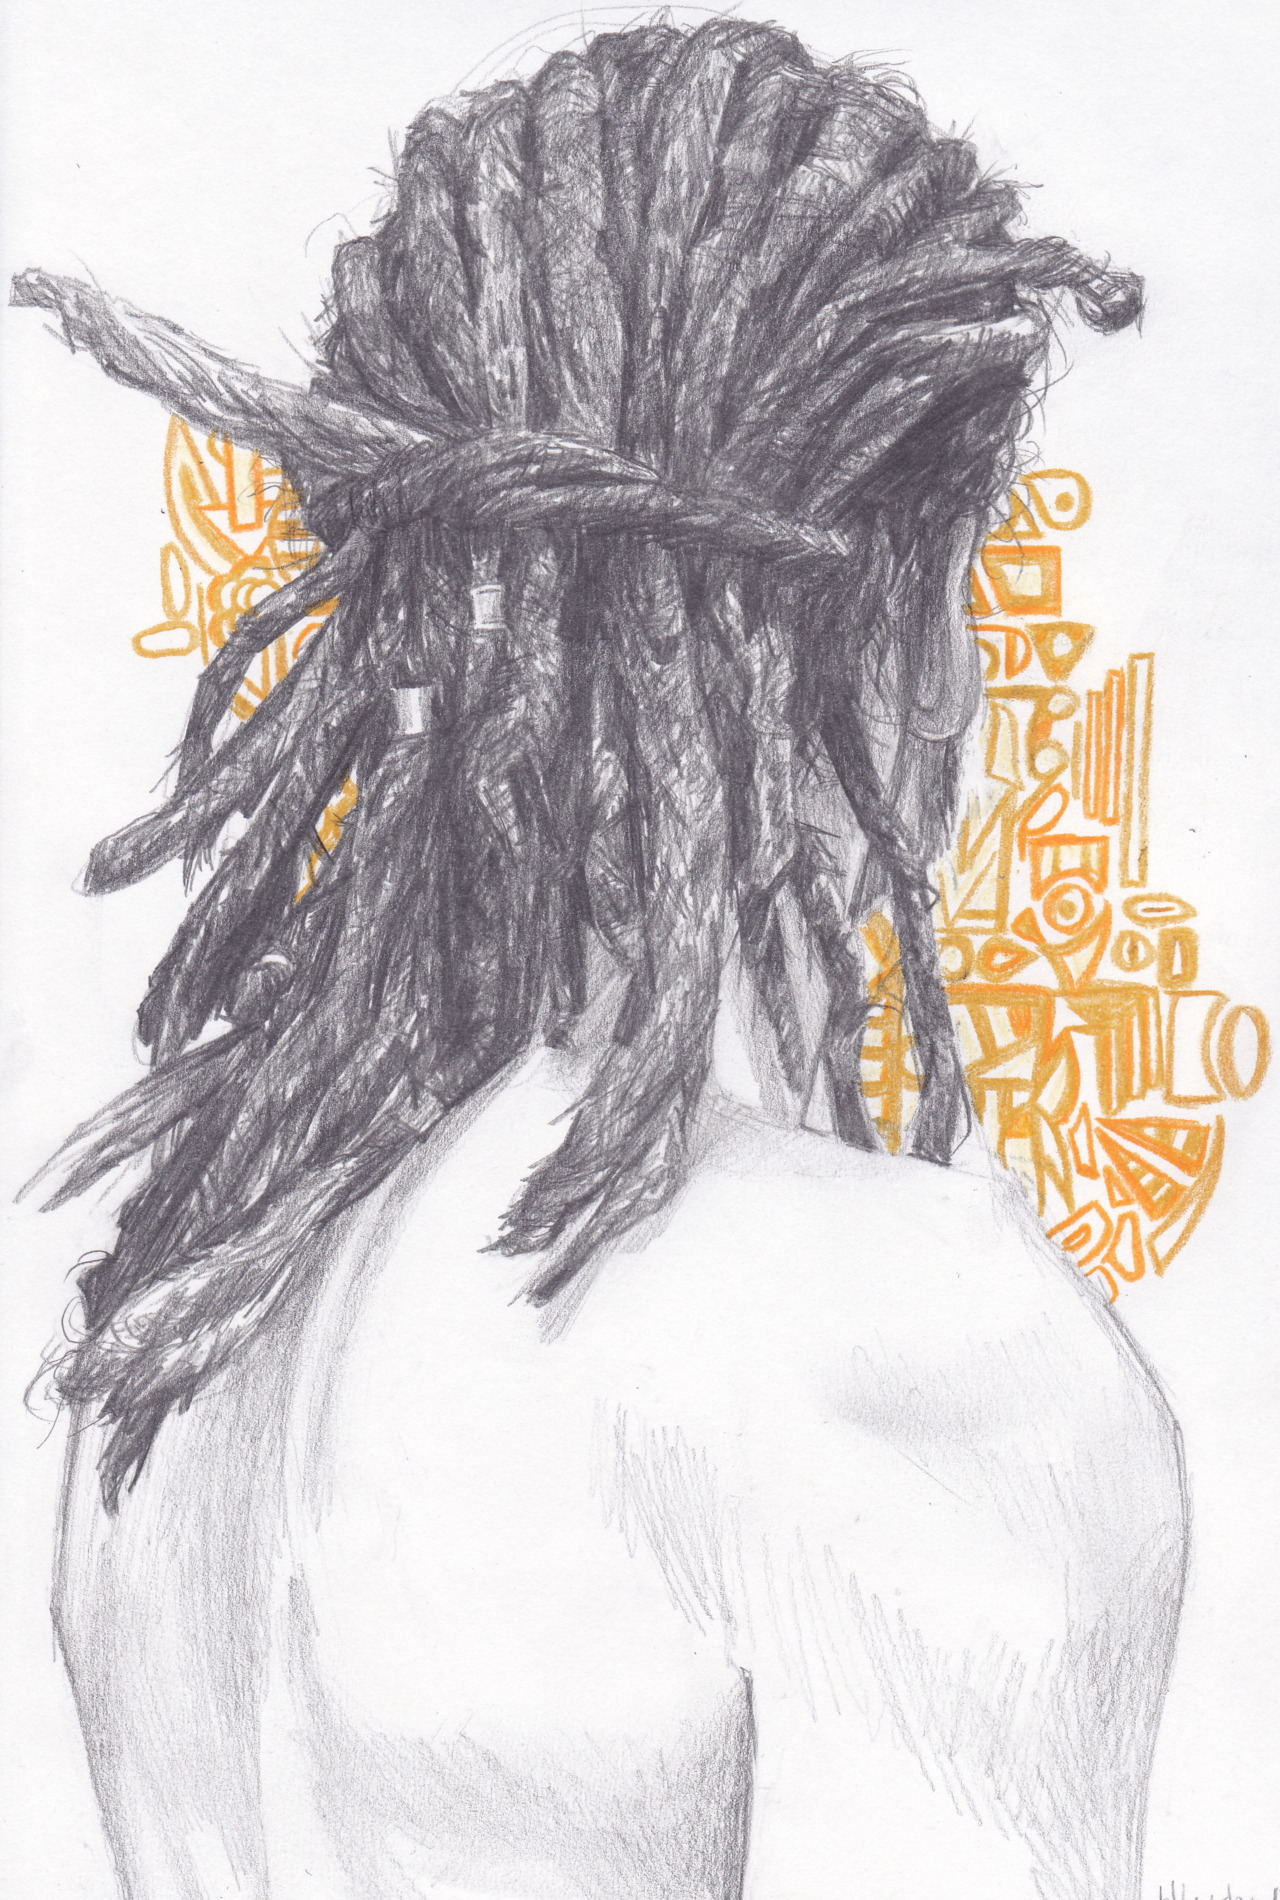 Top How To Draw Dreadlocks of all time The ultimate guide | drawimages4